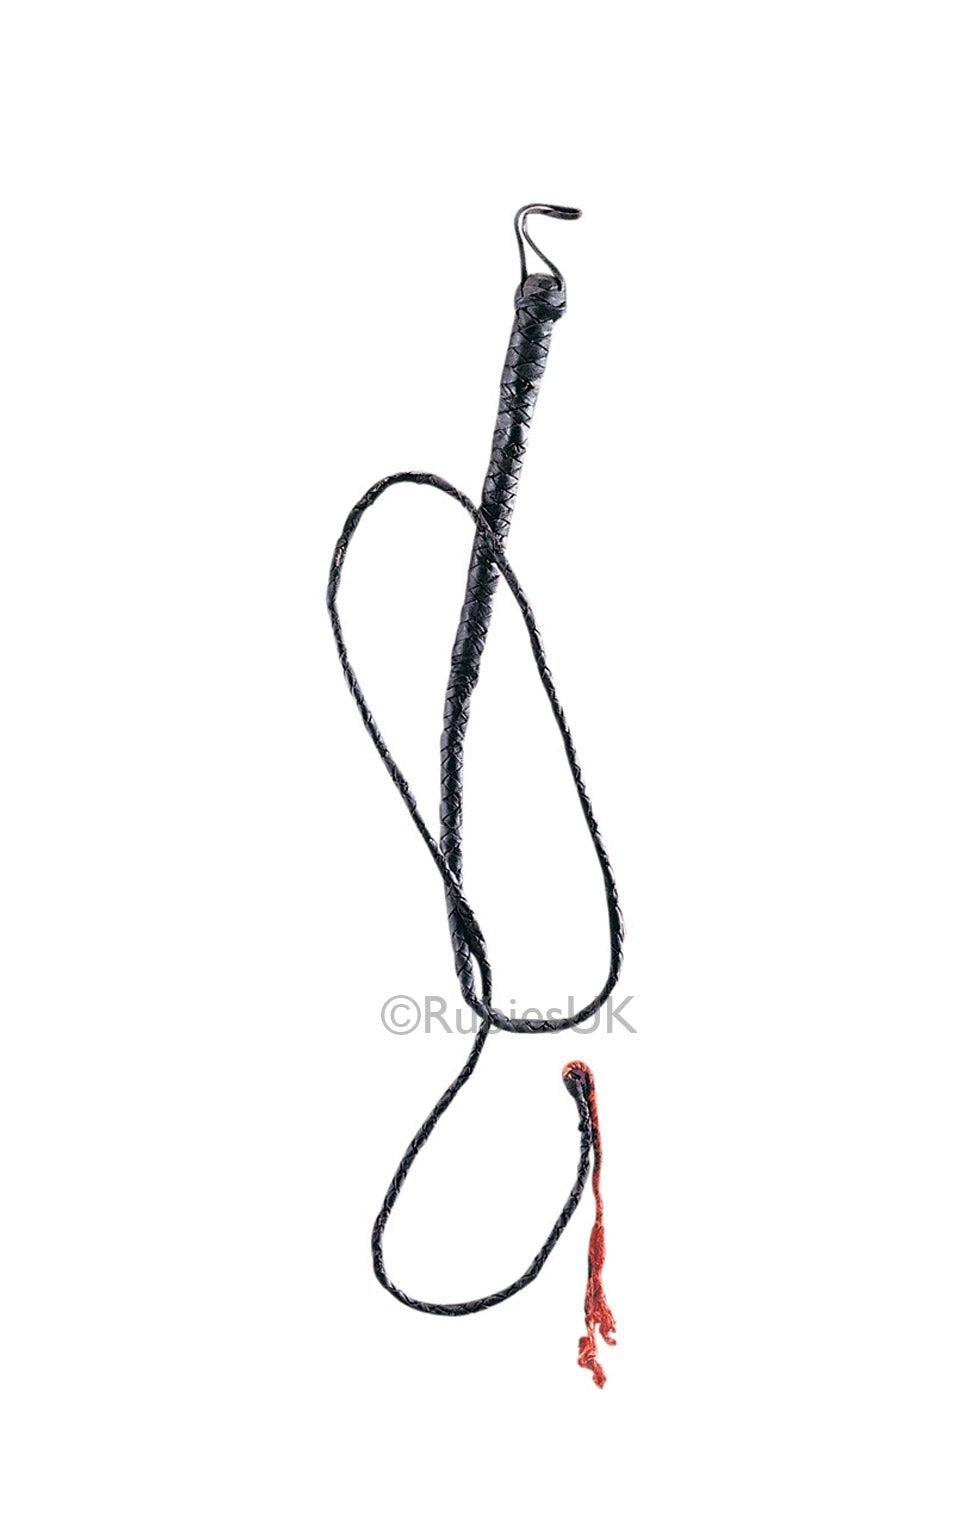 6 Inch Leather Bull Whip_1 rub-343ANS